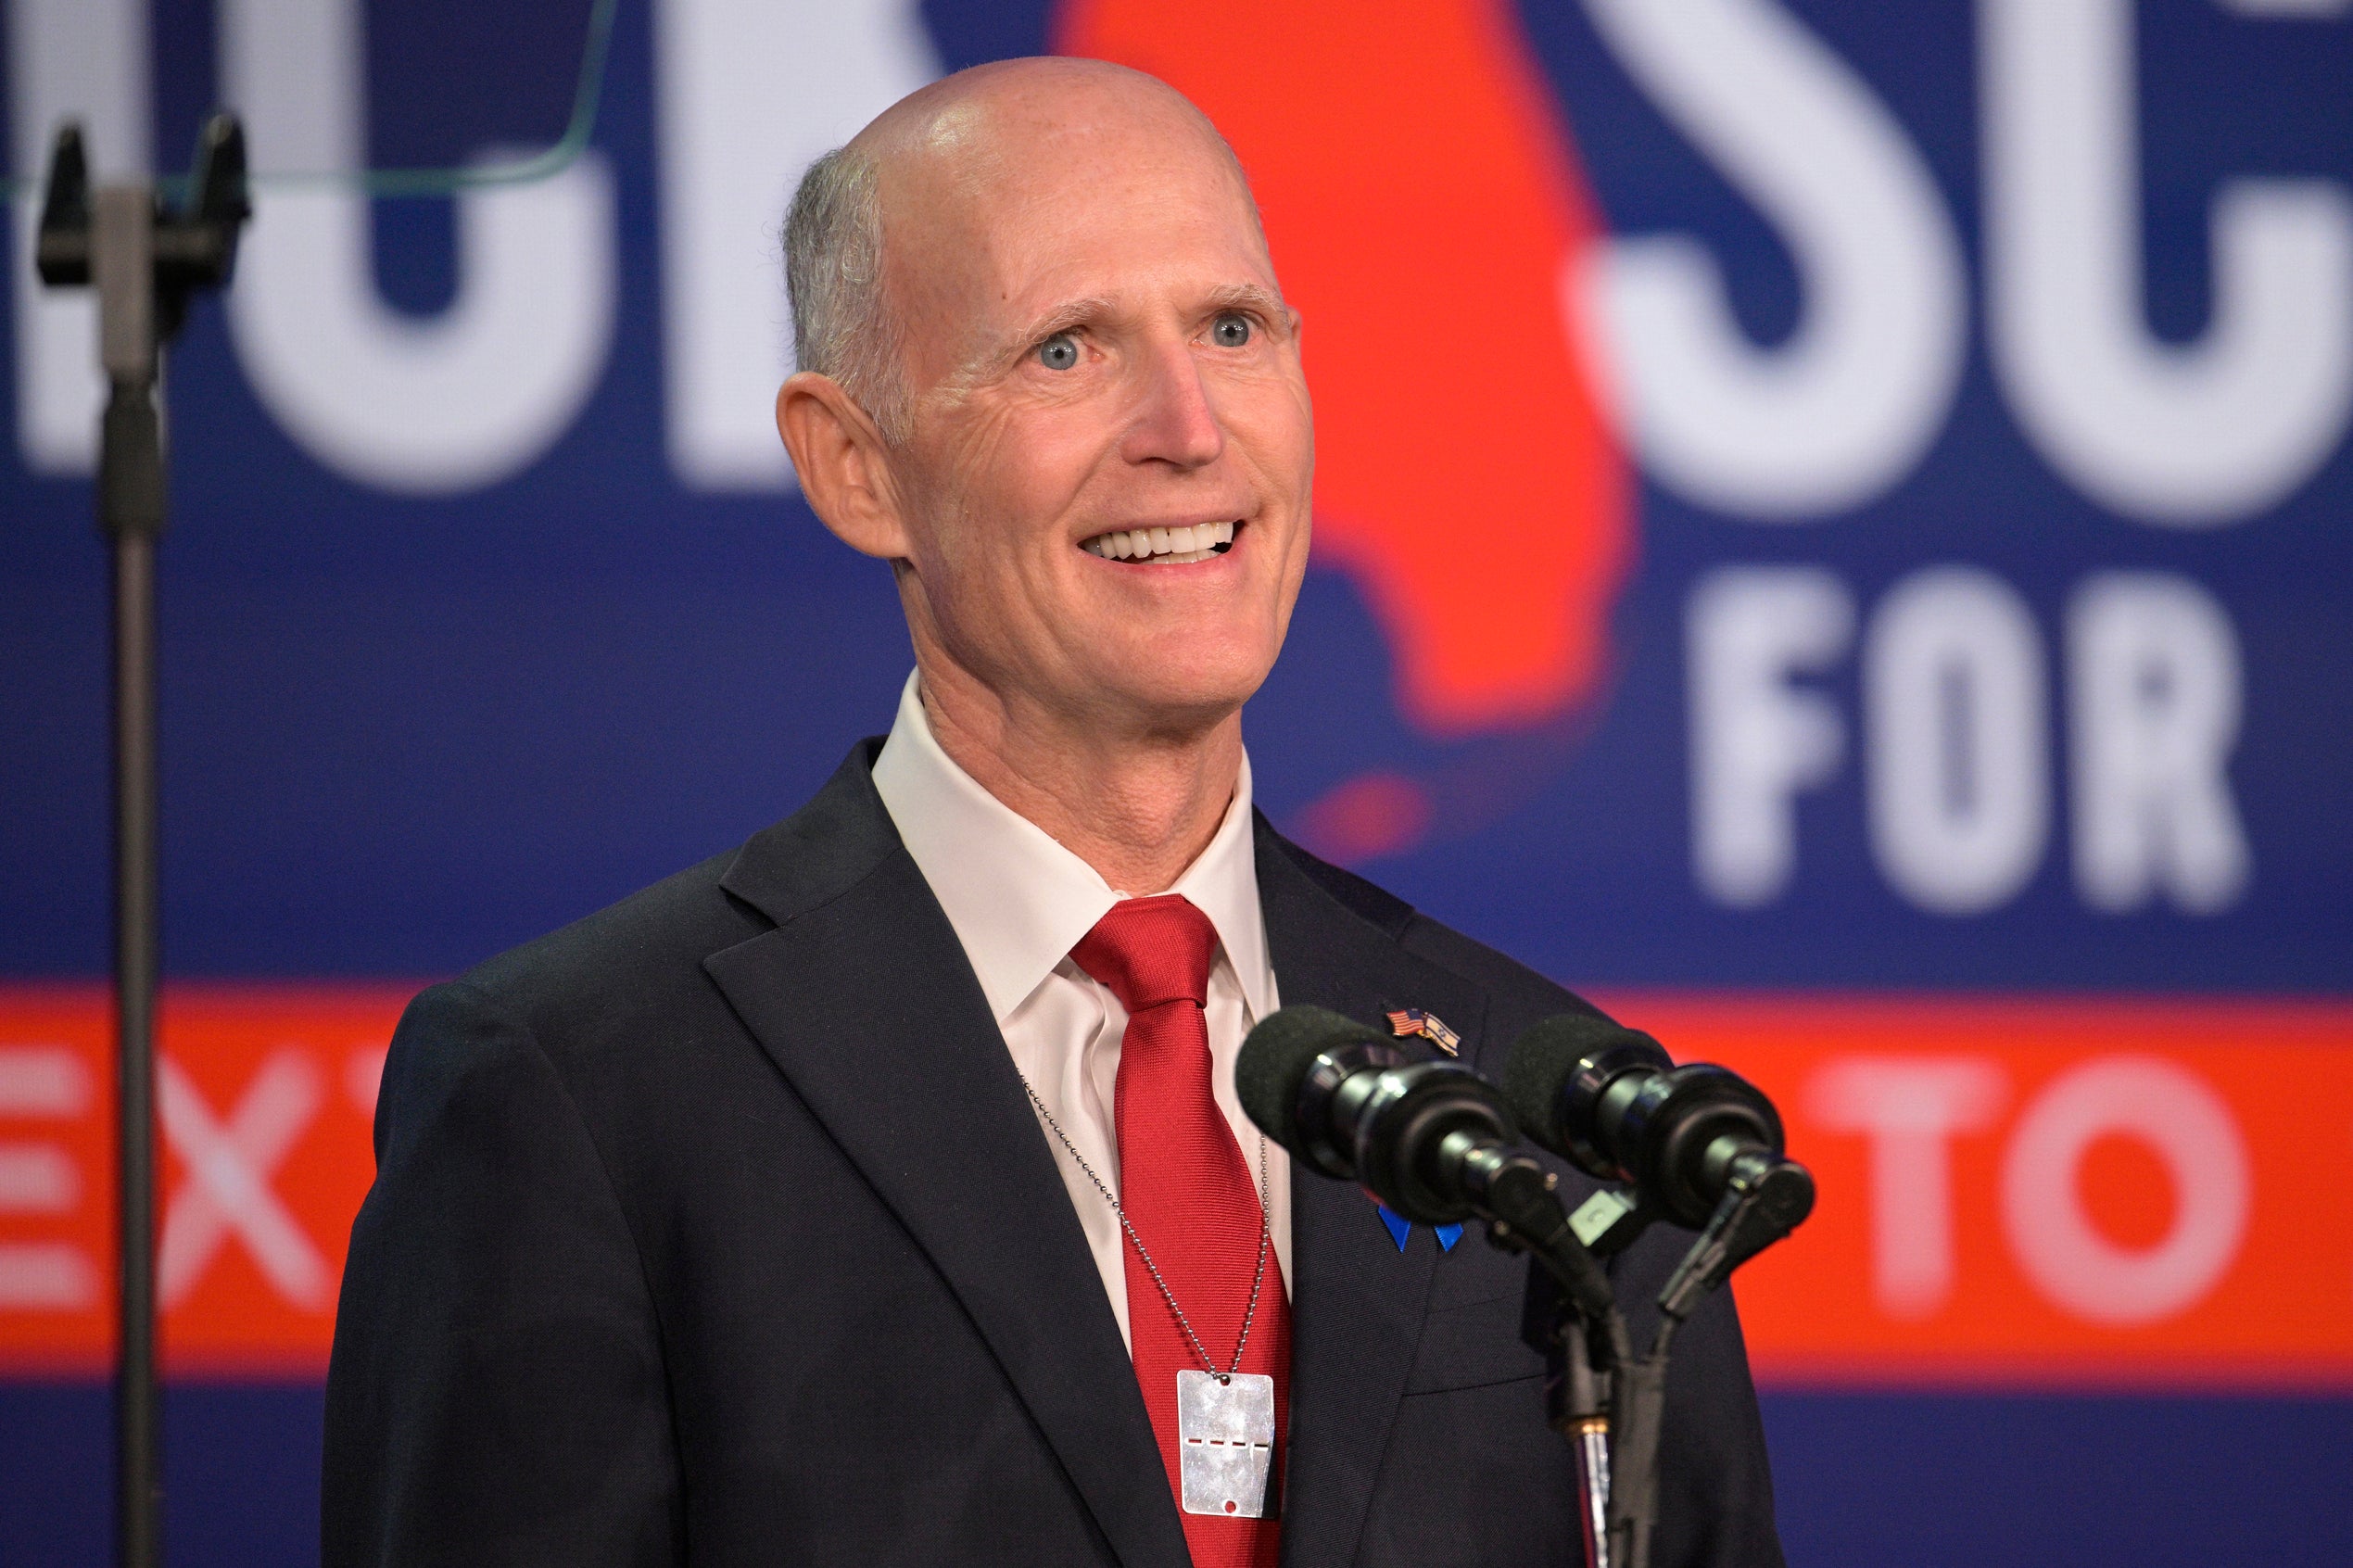 Senator Rick Scott, a Republican, is up for re-election in 2024. Democrats see his seat as a possible opportunity to expand their Senate majority